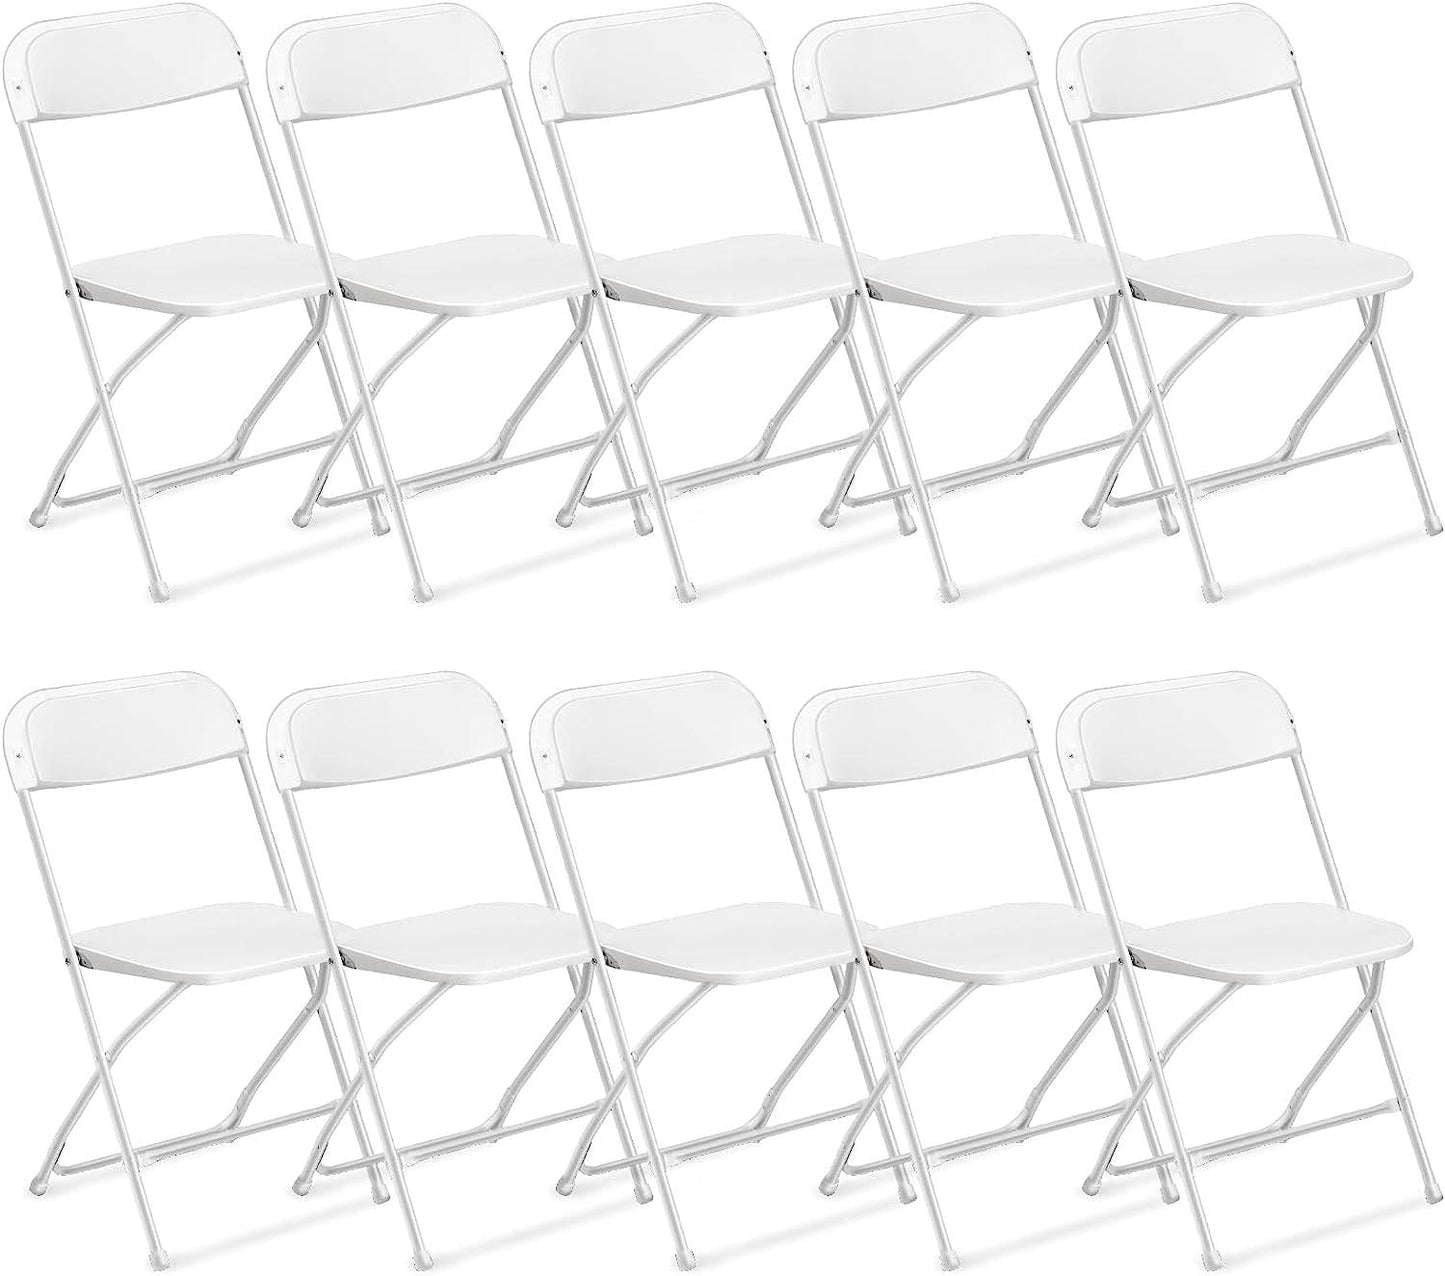 Ktaxon 10Pcs Commercial Plastic Folding Chairs Stackable Wedding Party Chairs,White